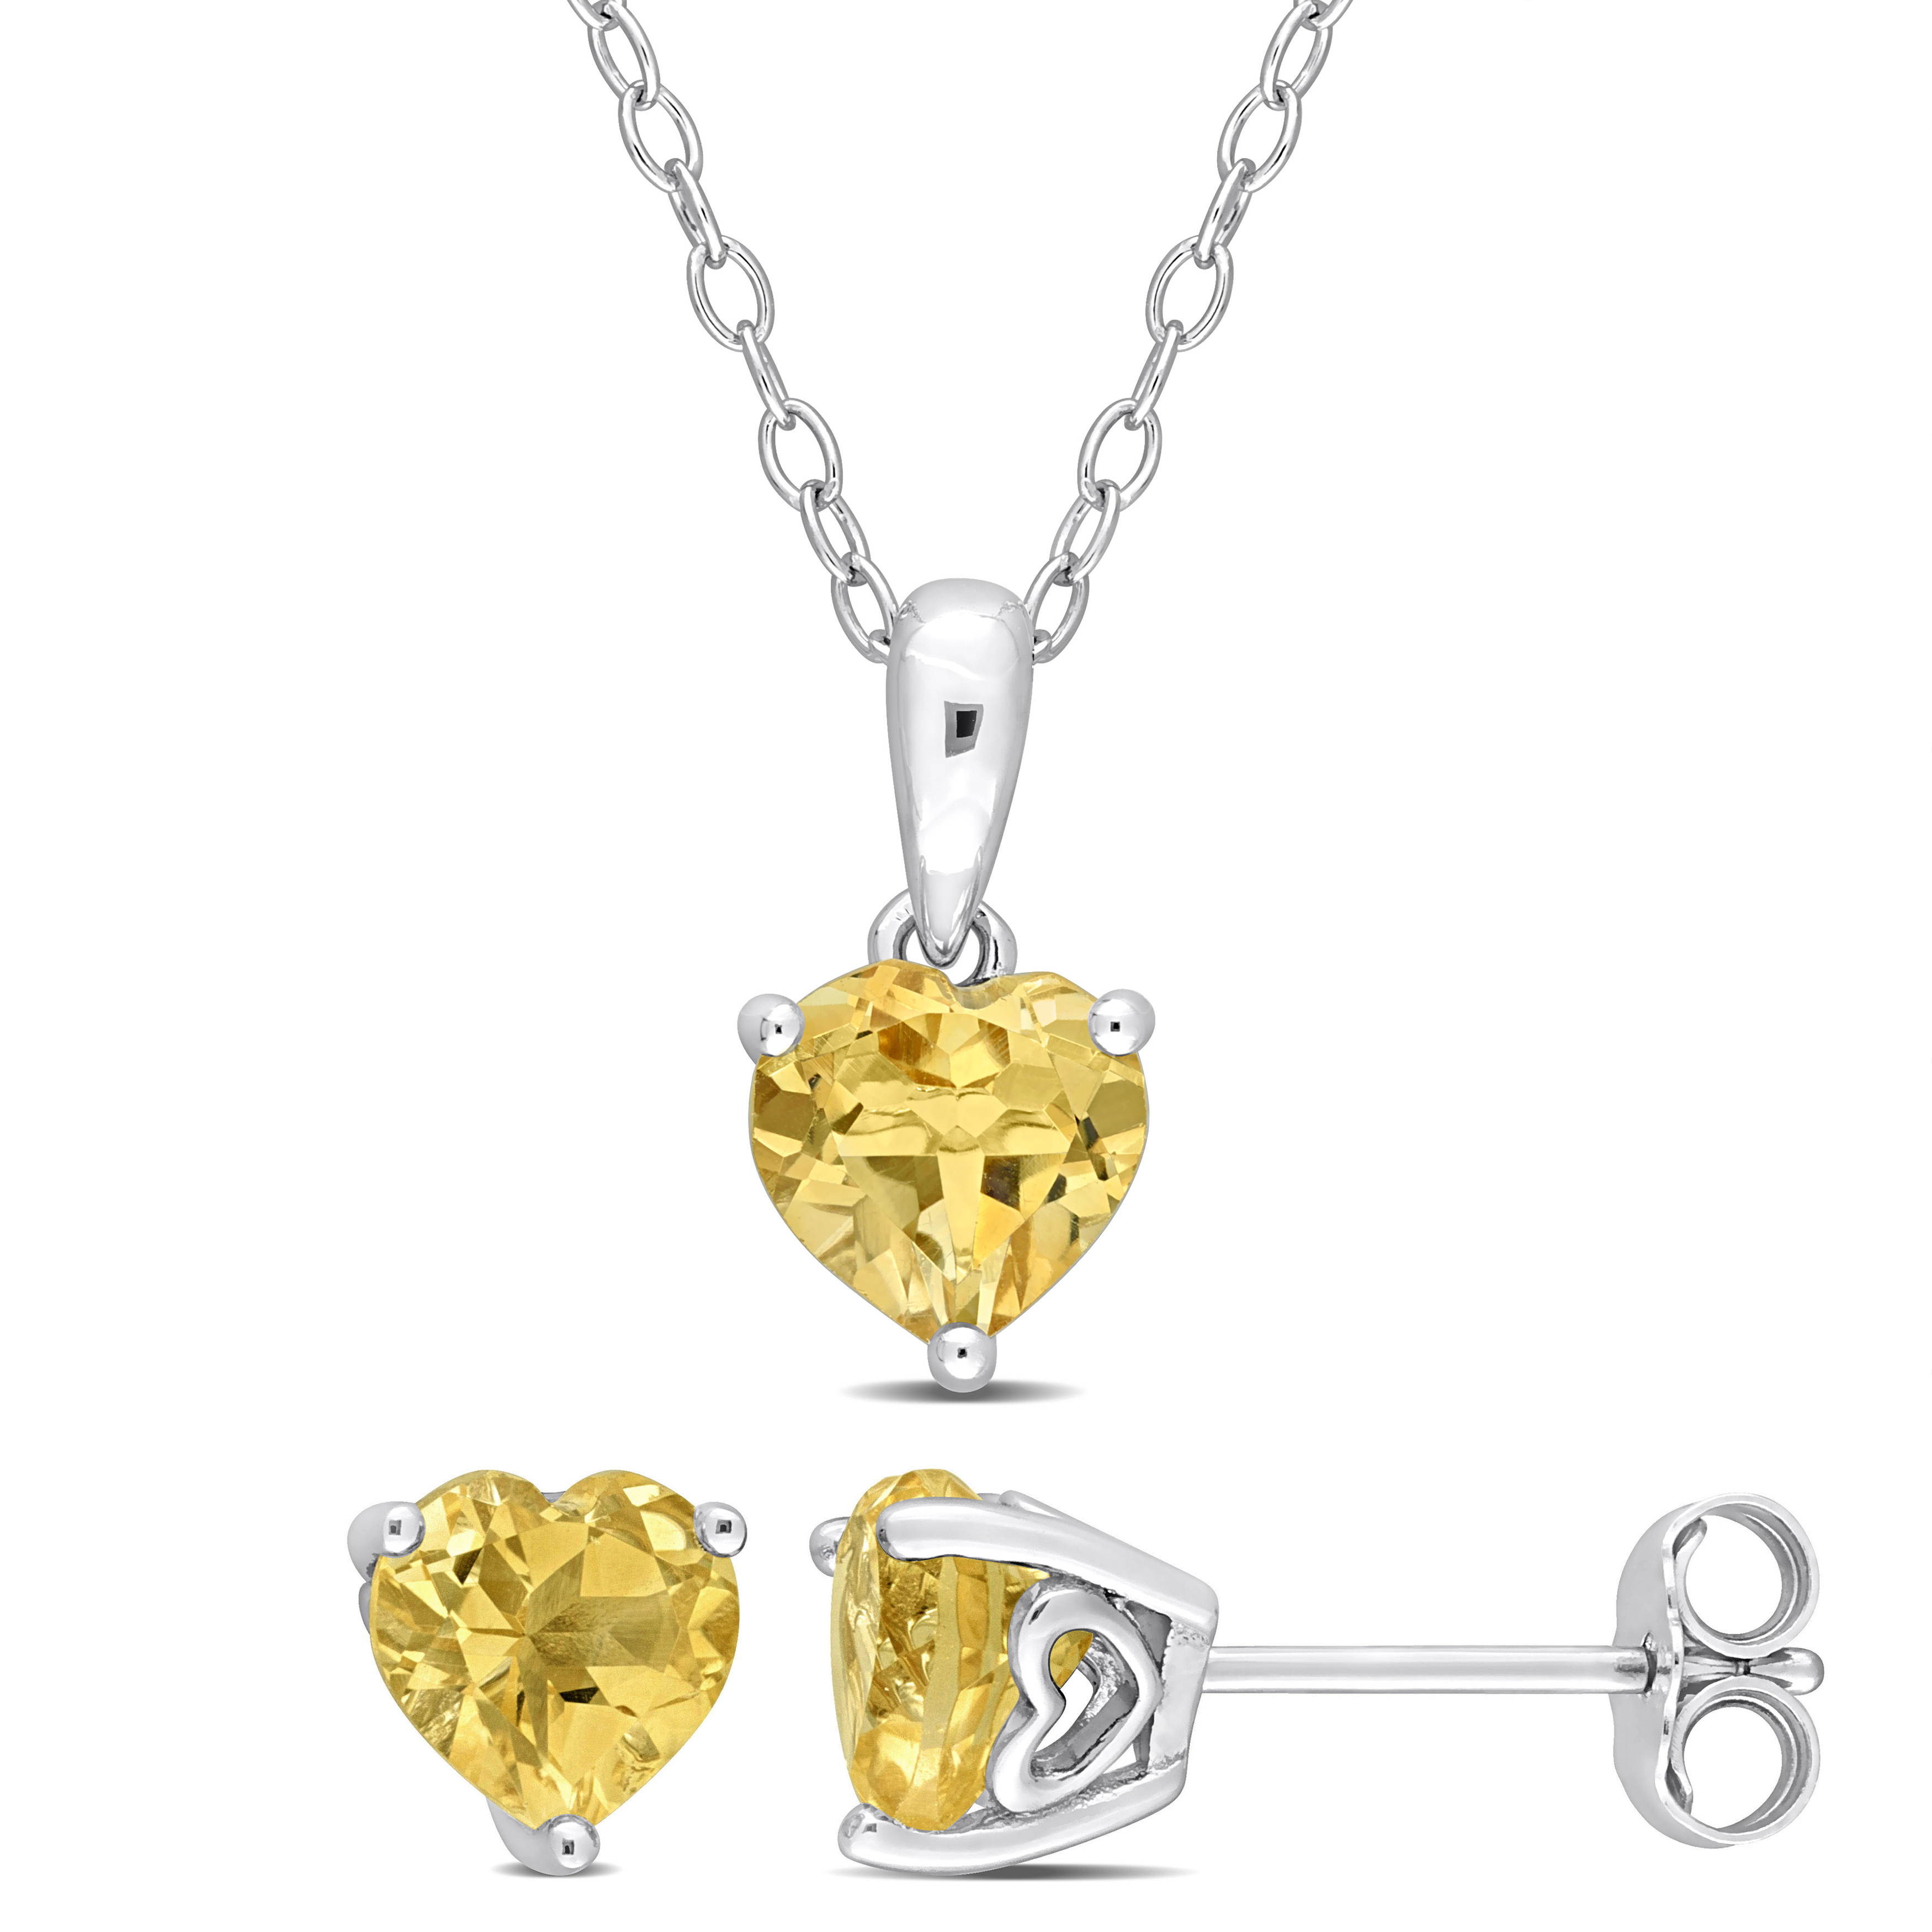 2 1/6 CT TGW Heart-Shape Citrine 2-Piece Set of Pendant with Chain and Earrings in Sterling Silver